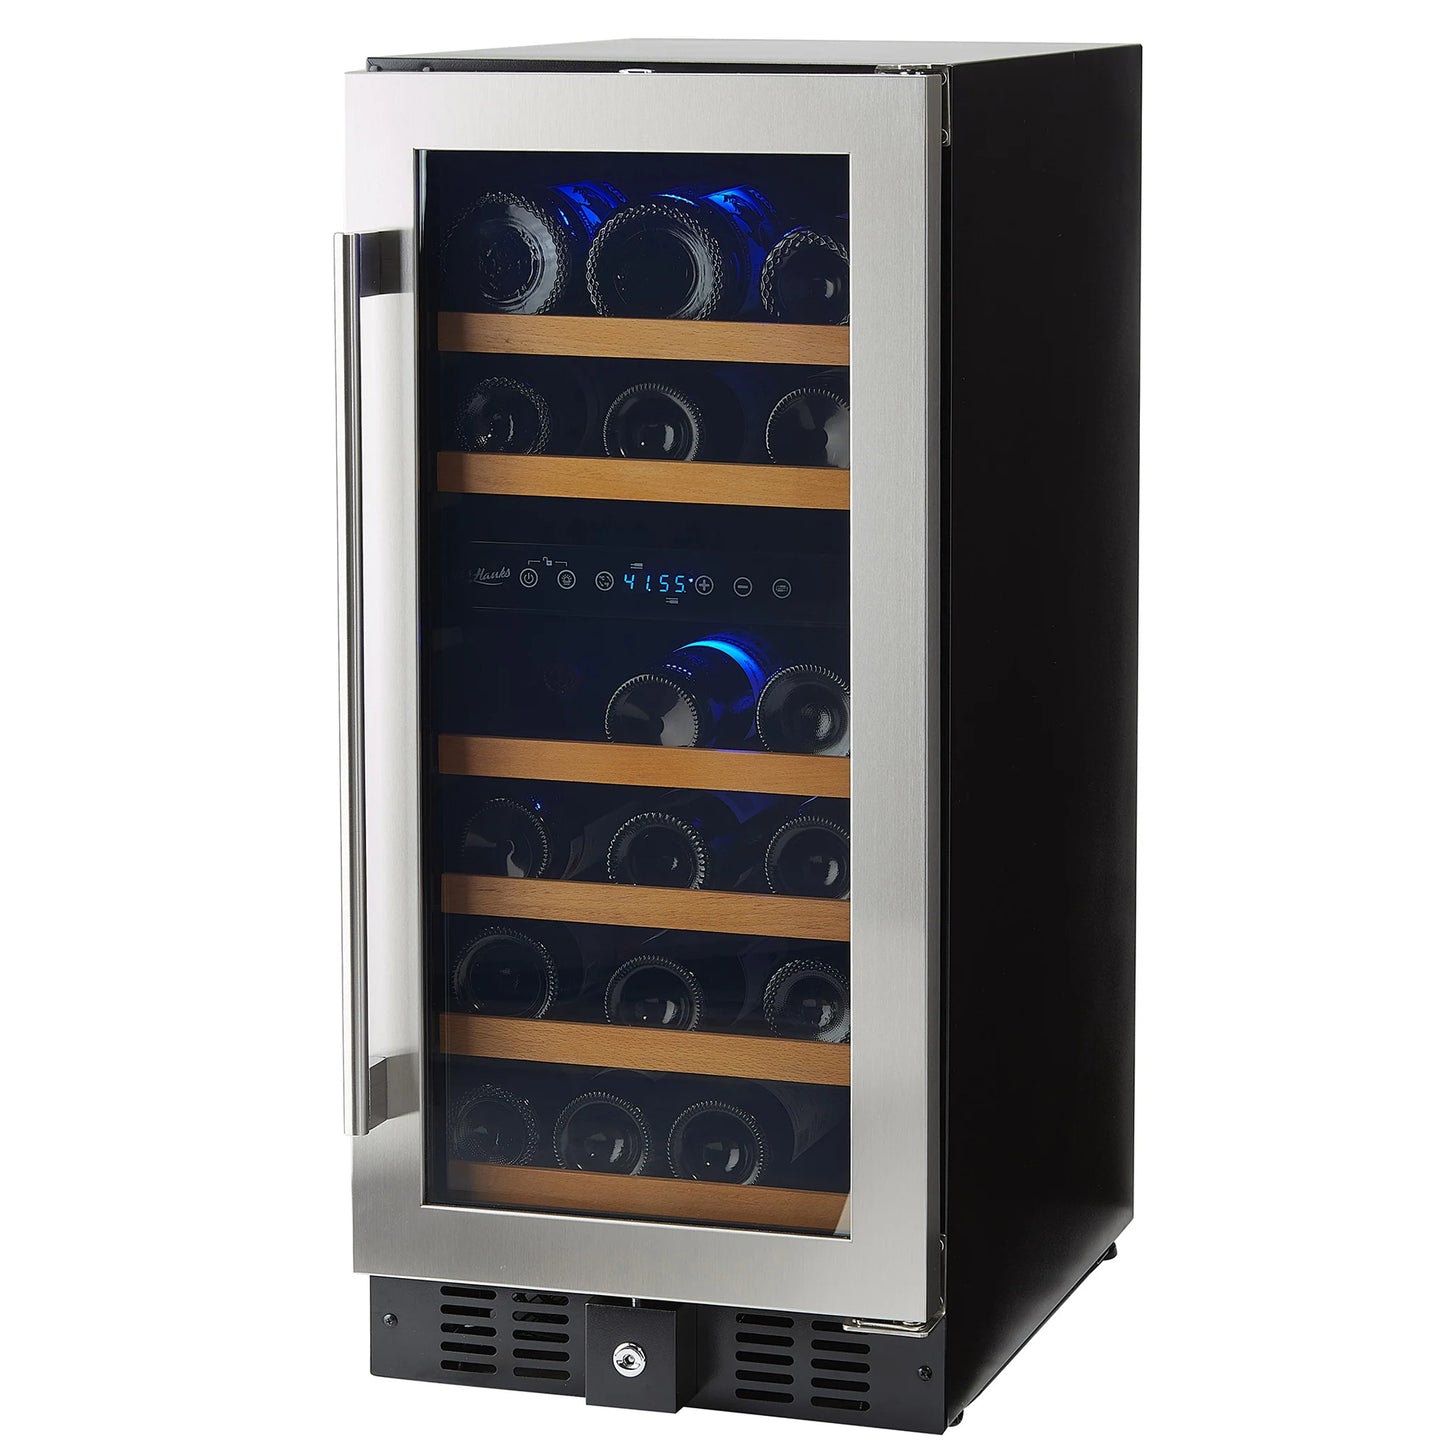 Smith-and-Hanks-32-bottle-wine-cooler-dual-zone-RW88DRE-premium-seamless-stainless-steel-angle_2048x2048_c0c141aa-4d66-458f-b75d-59500286b437